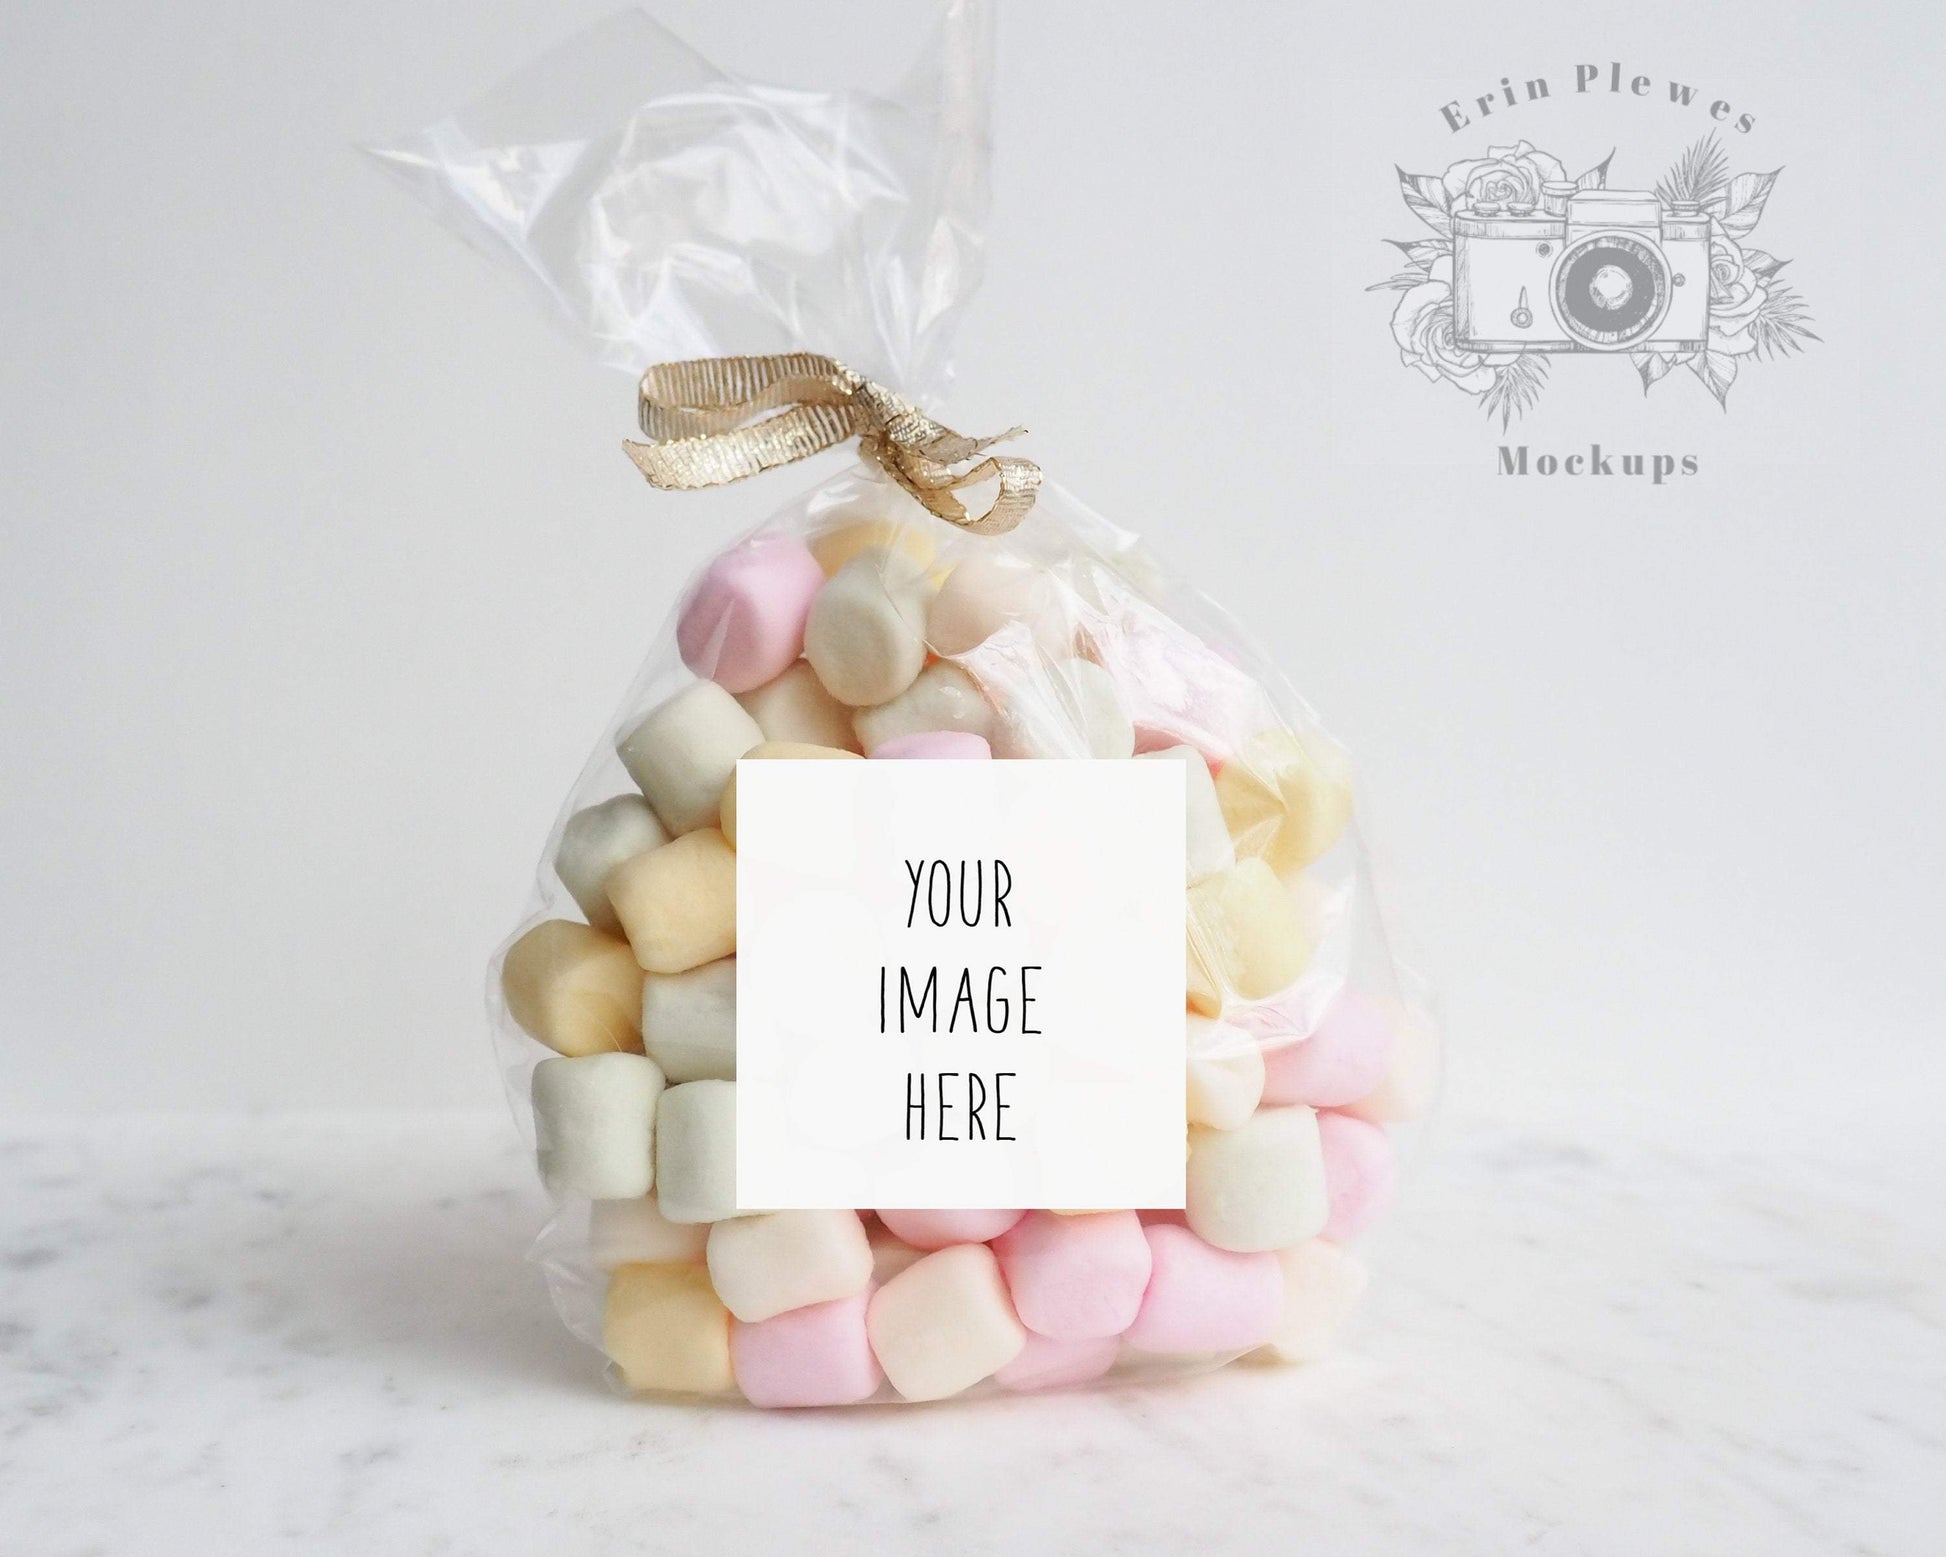 Erin Plewes Mockups Sticker mockup, Square label mock up for party gift bags and styled stock photography, Jpeg Instant Digital Download Template